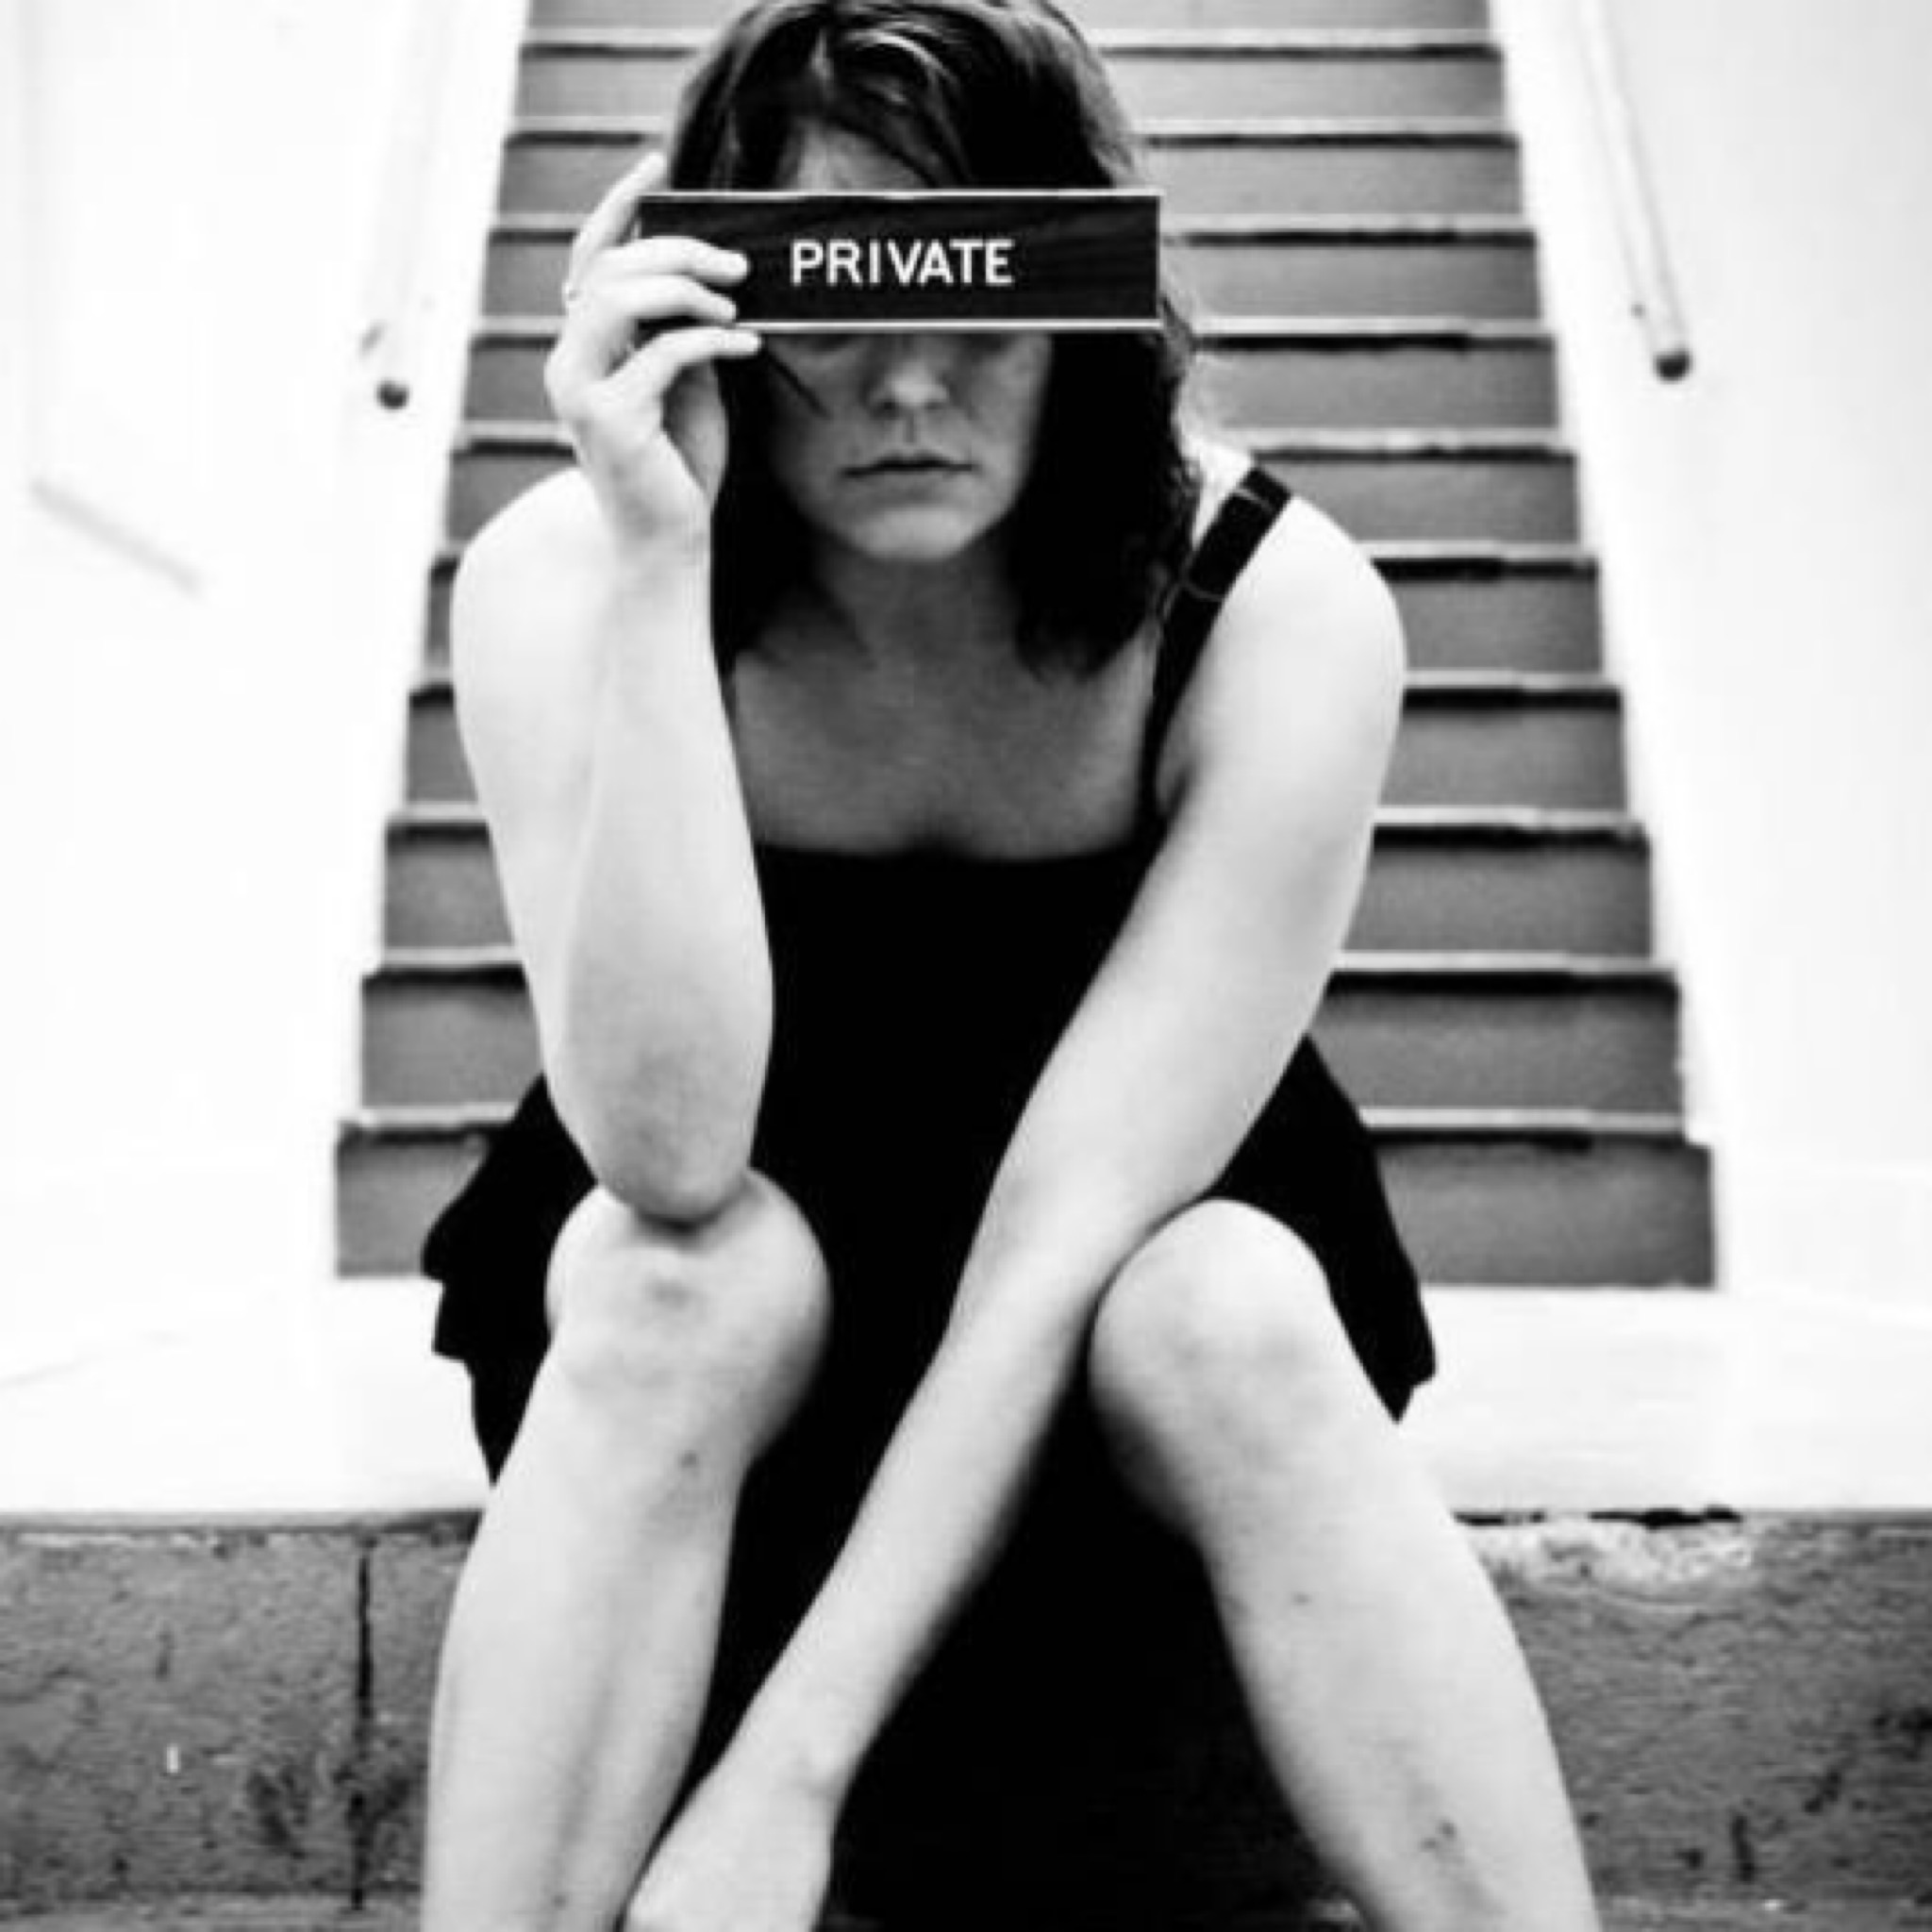 Black and white photo of Stephanie Strange sitting on concrete steps holding a sign that says private over her eyes